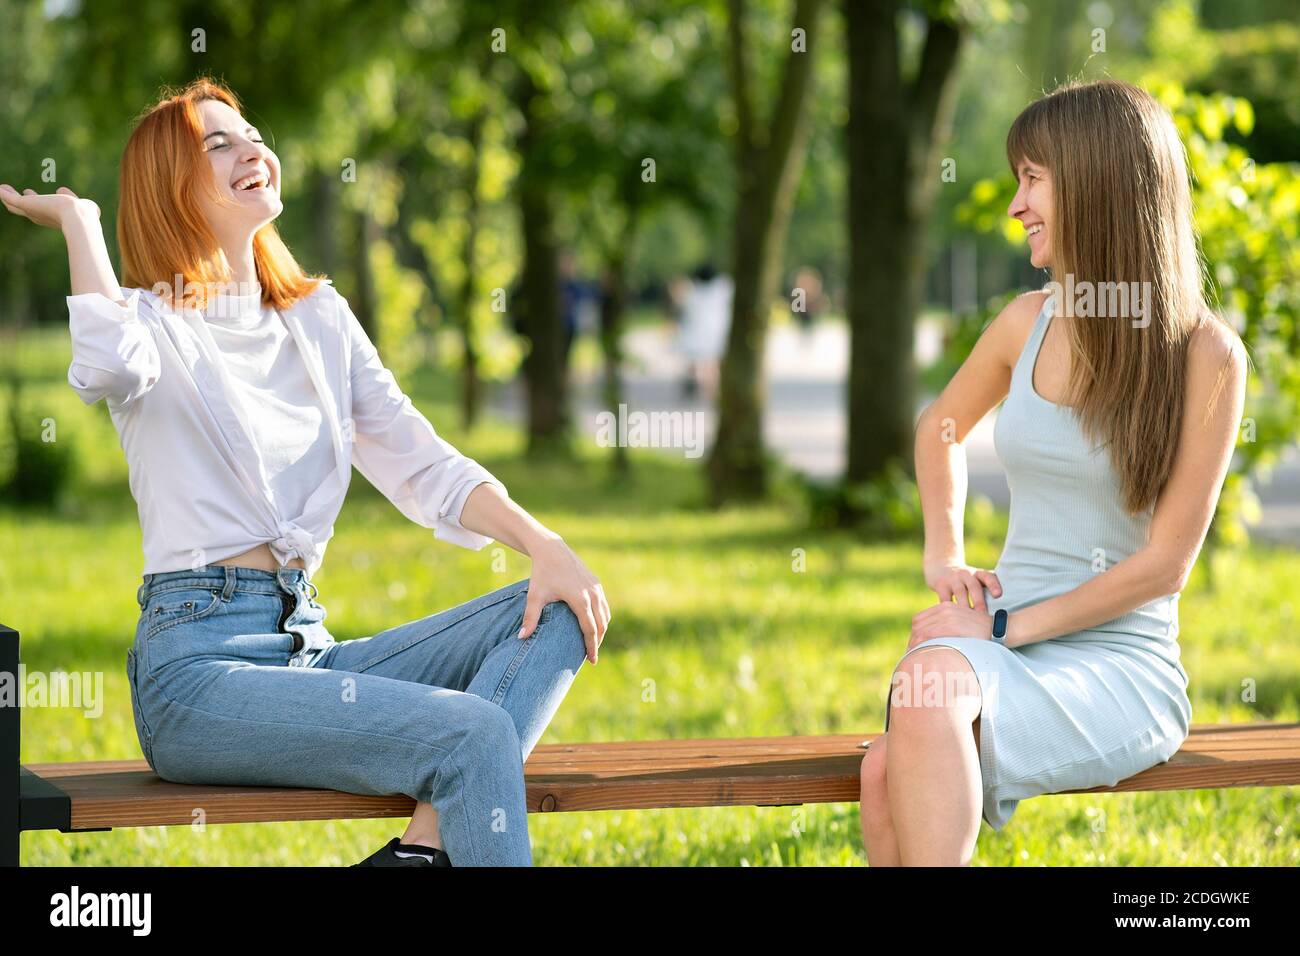 Two young girls friends sitting on a bench in summer park chatting happily having fun. Stock Photo